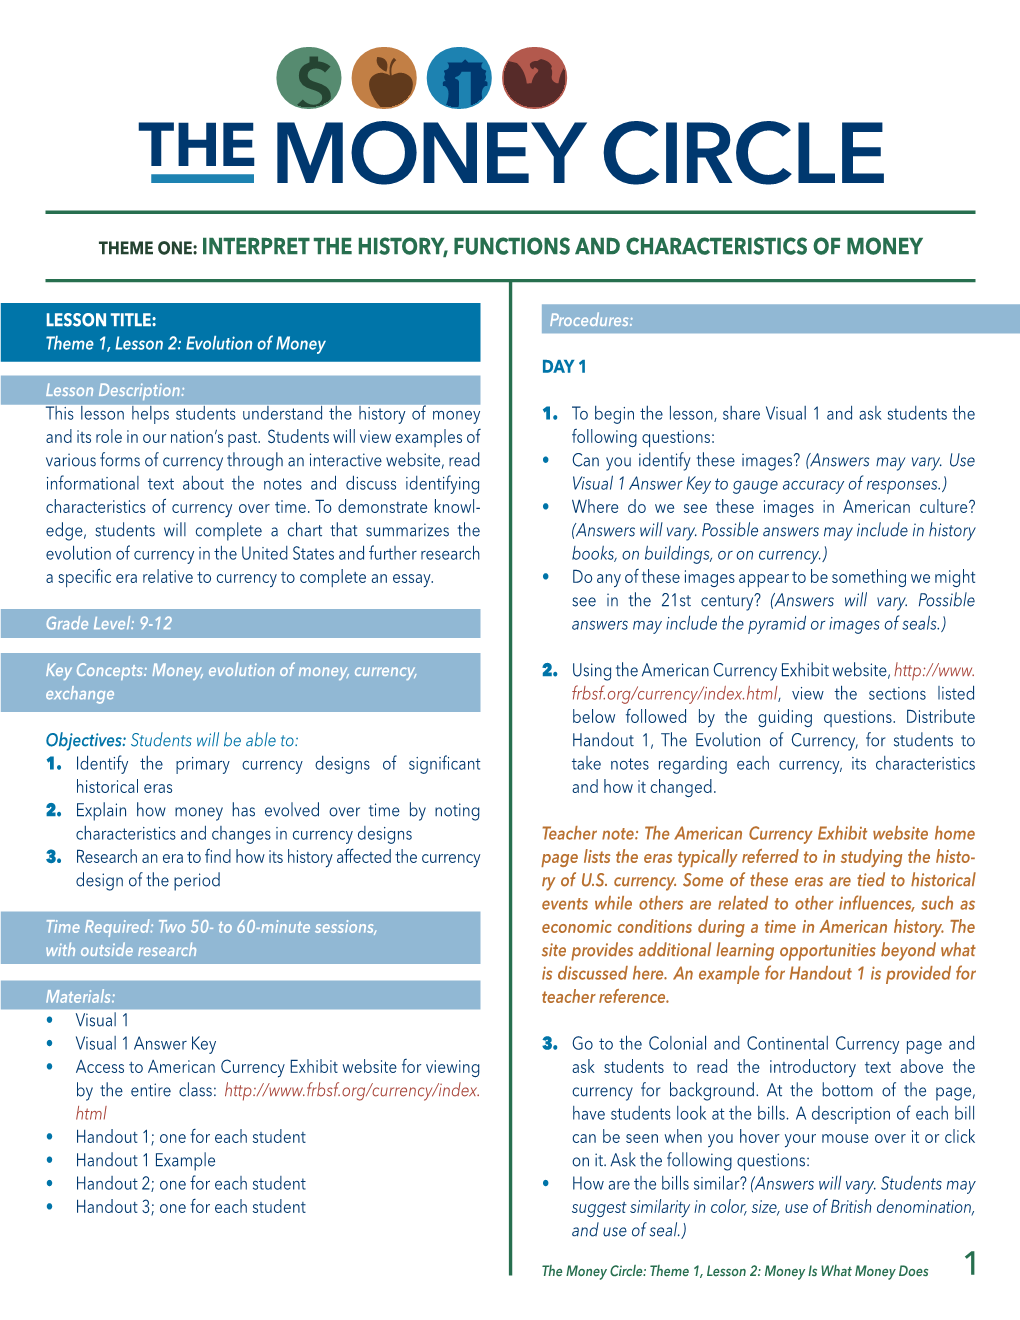 Evolution of Money DAY 1 Lesson Description: This Lesson Helps Students Understand the History of Money 1